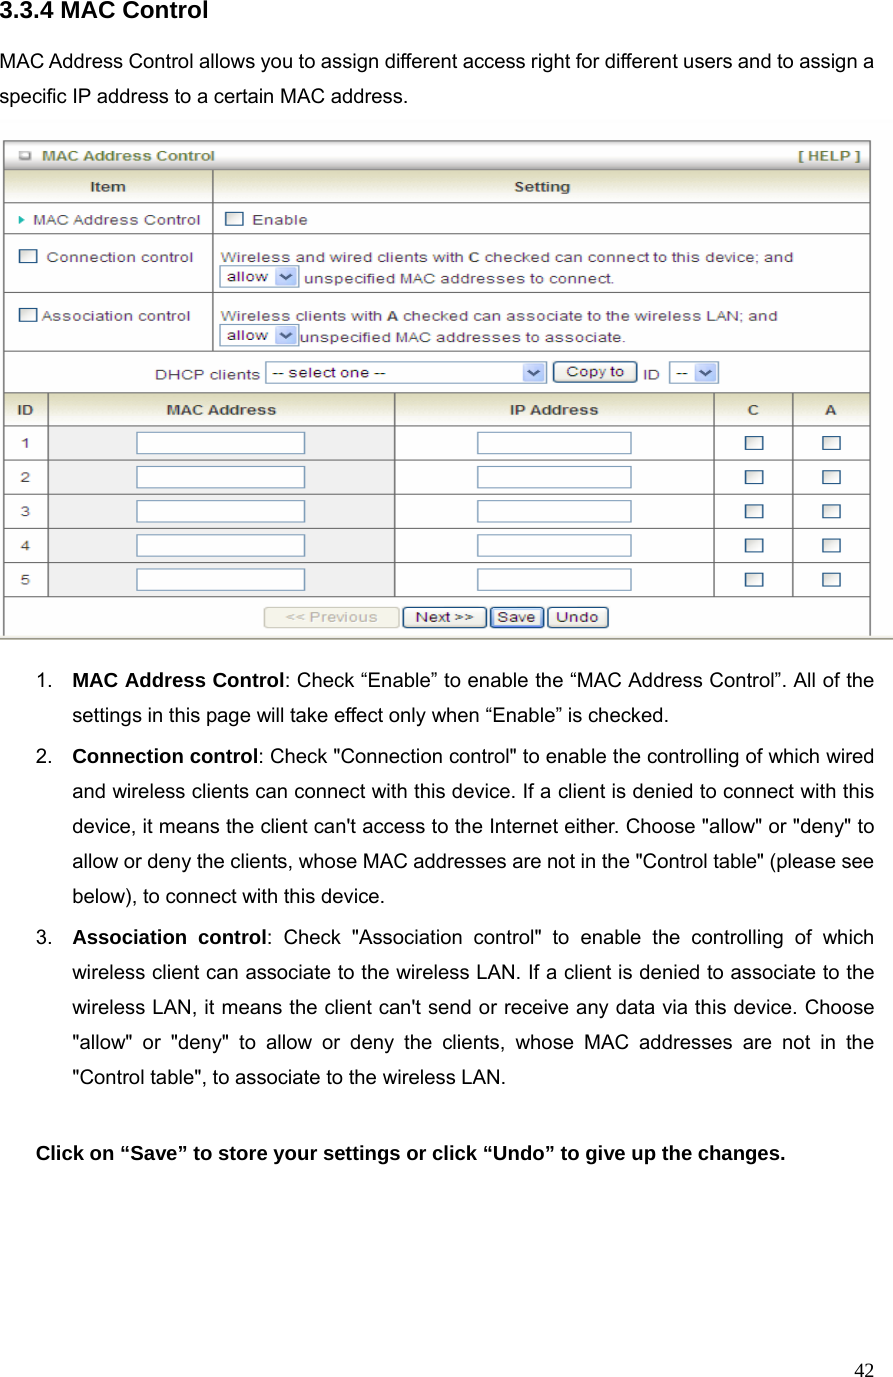  423.3.4 MAC Control  MAC Address Control allows you to assign different access right for different users and to assign a specific IP address to a certain MAC address.   1.  MAC Address Control: Check “Enable” to enable the “MAC Address Control”. All of the settings in this page will take effect only when “Enable” is checked. 2.  Connection control: Check &quot;Connection control&quot; to enable the controlling of which wired and wireless clients can connect with this device. If a client is denied to connect with this device, it means the client can&apos;t access to the Internet either. Choose &quot;allow&quot; or &quot;deny&quot; to allow or deny the clients, whose MAC addresses are not in the &quot;Control table&quot; (please see below), to connect with this device. 3.  Association control: Check &quot;Association control&quot; to enable the controlling of which wireless client can associate to the wireless LAN. If a client is denied to associate to the wireless LAN, it means the client can&apos;t send or receive any data via this device. Choose &quot;allow&quot; or &quot;deny&quot; to allow or deny the clients, whose MAC addresses are not in the &quot;Control table&quot;, to associate to the wireless LAN.  Click on “Save” to store your settings or click “Undo” to give up the changes.     